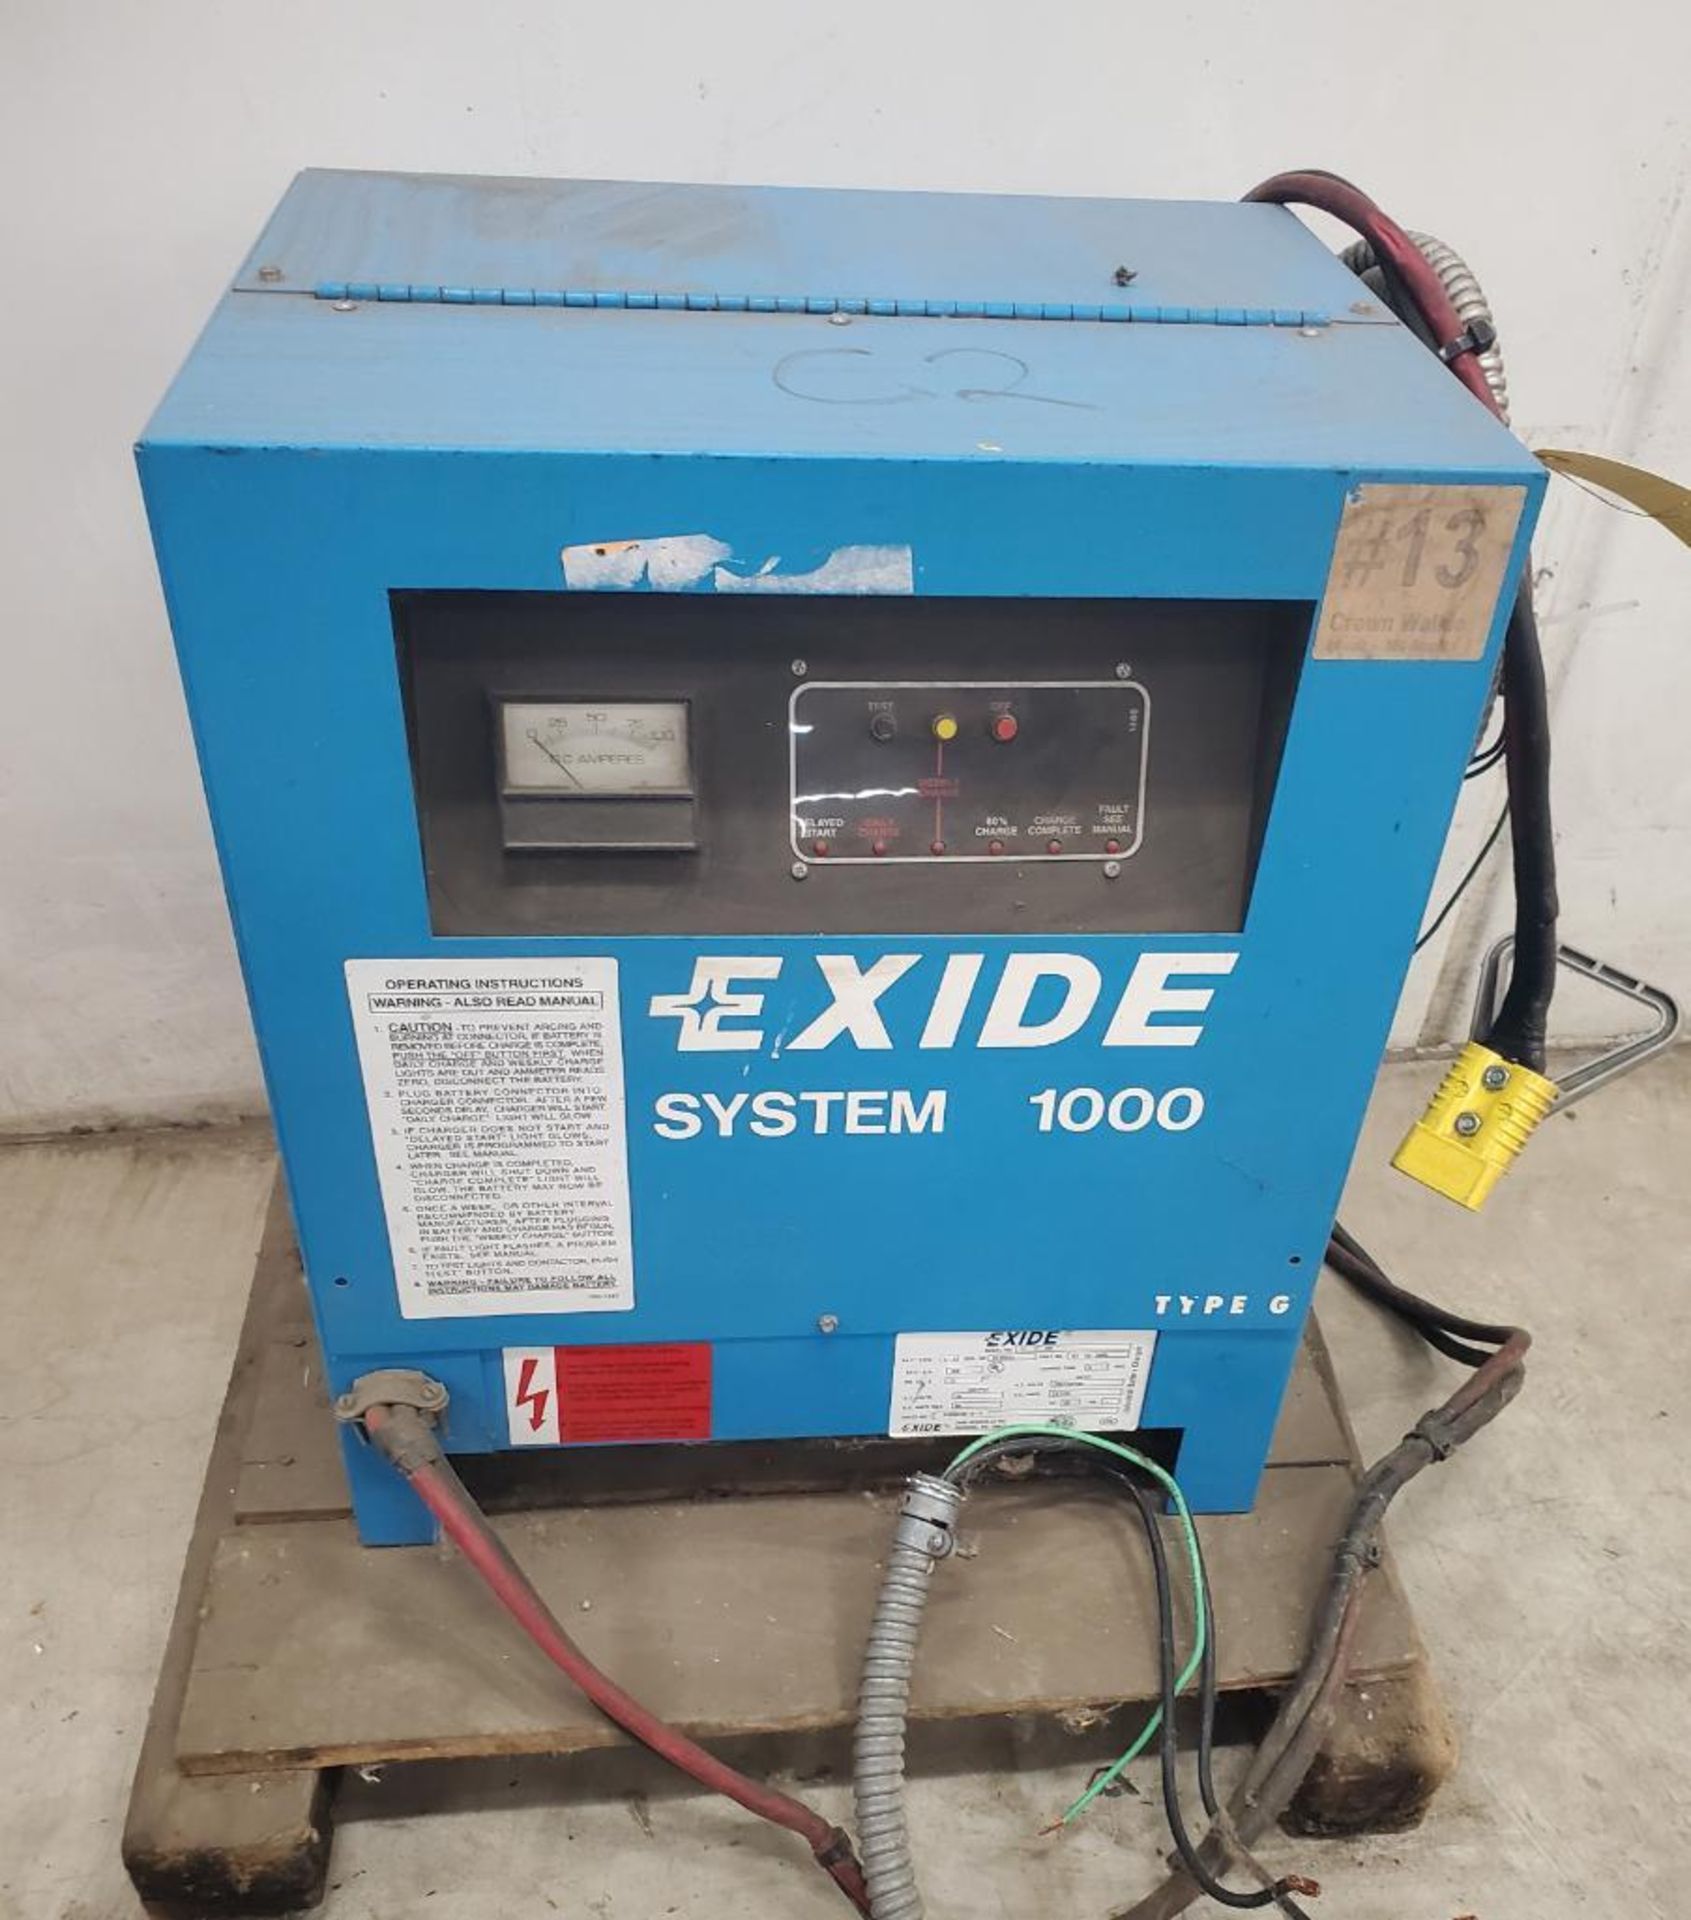 EXIDE BATTERY CHARGER; MODEL G1-12-380, S/N UL35543, BATTERY TYPE LA, NO. CELL 12, 24-VOLTS ***